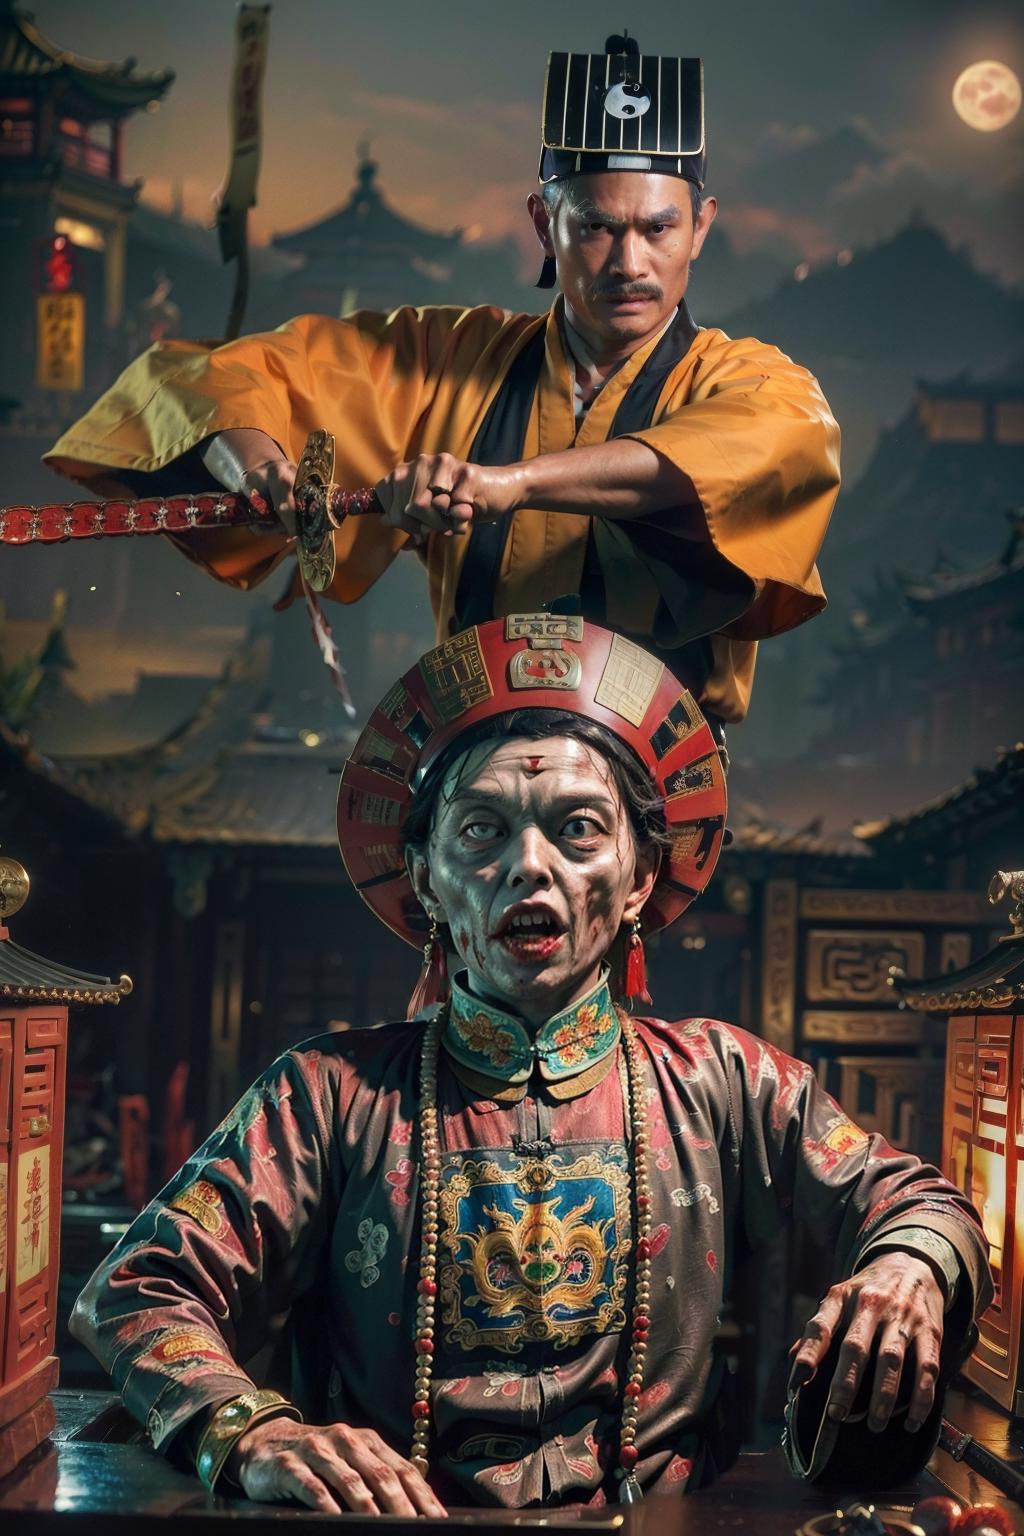 A man in a yellow and red kimono holds a sword over another man's head, who is wearing a Chinese-style hat. The scene appears to be a 3D rendered image or a painting, and the man with the sword seems to be a warrior. The two men are facing each other, and the sword is positioned in a threatening manner, creating a dramatic and intense atmosphere.